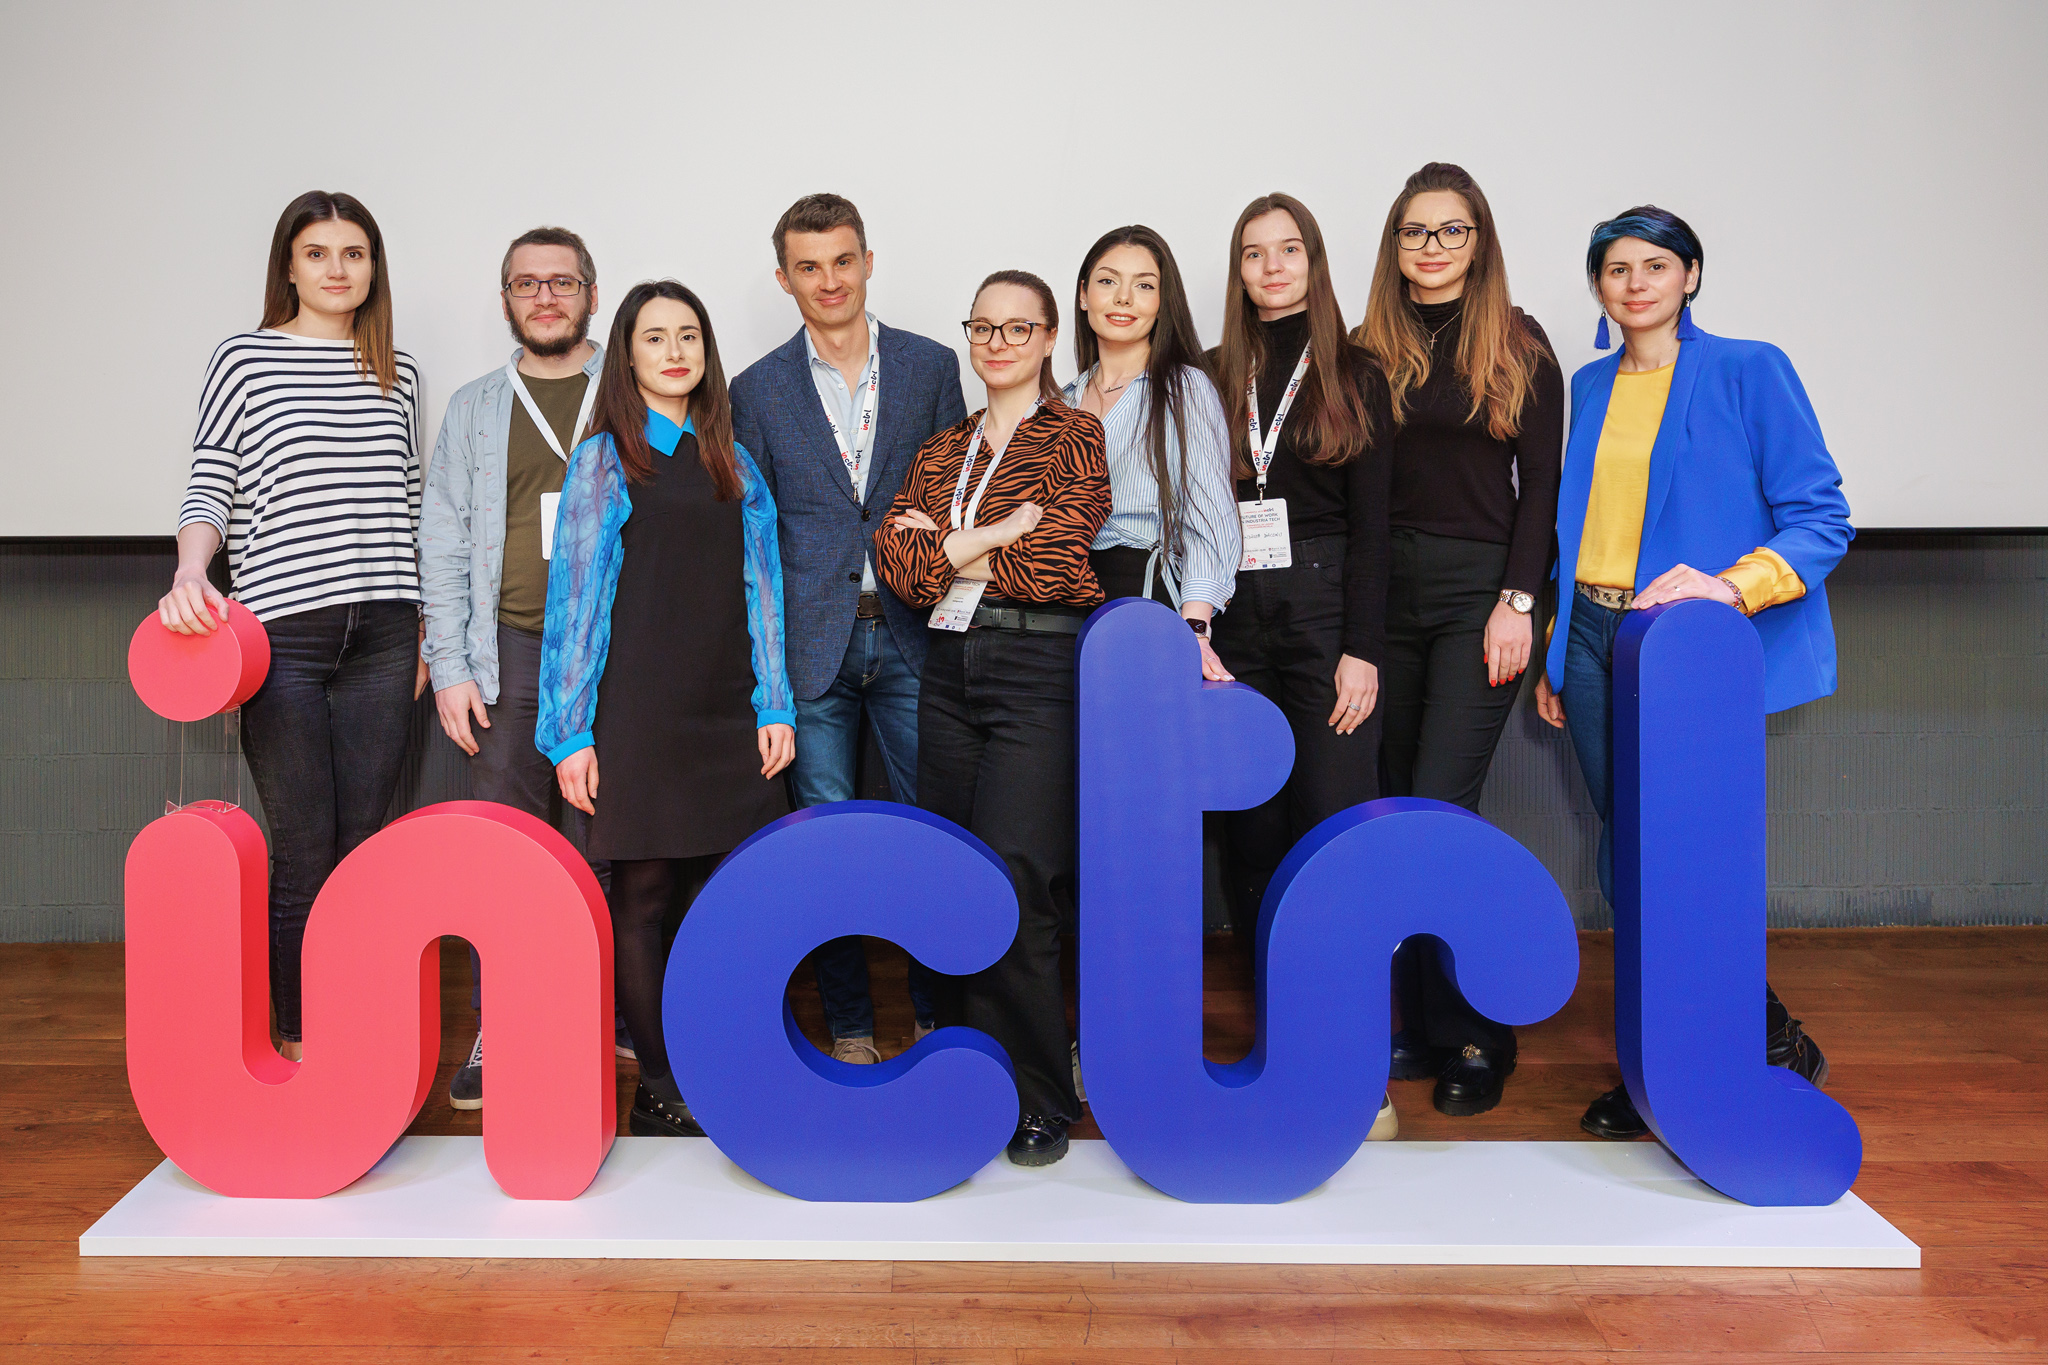 Inctrl.ai, a unique recruitment platform in Romania, launched after an investment of almost 8 million lei